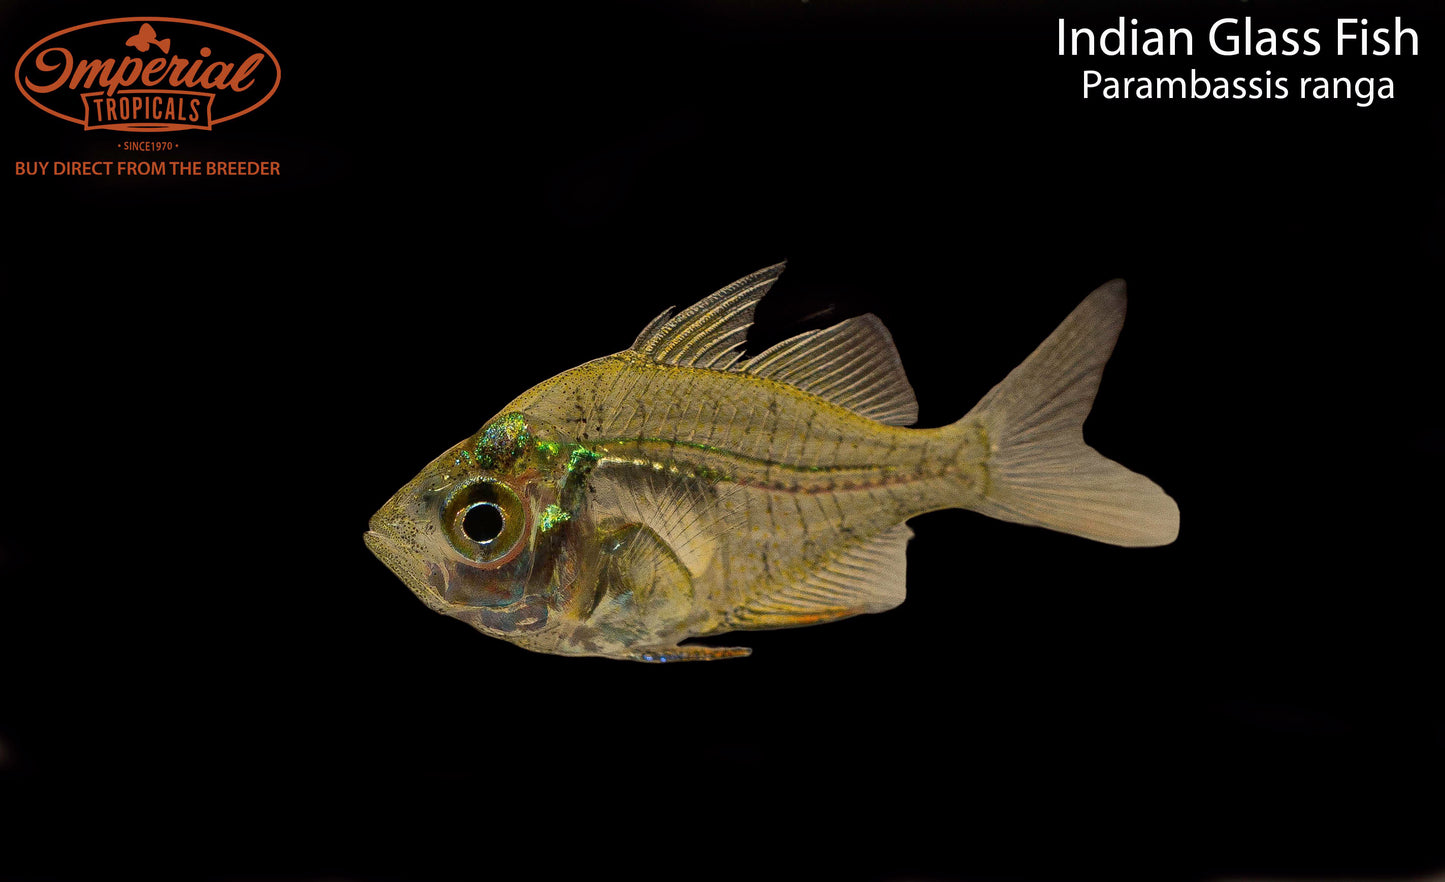 Indian Glass Fish